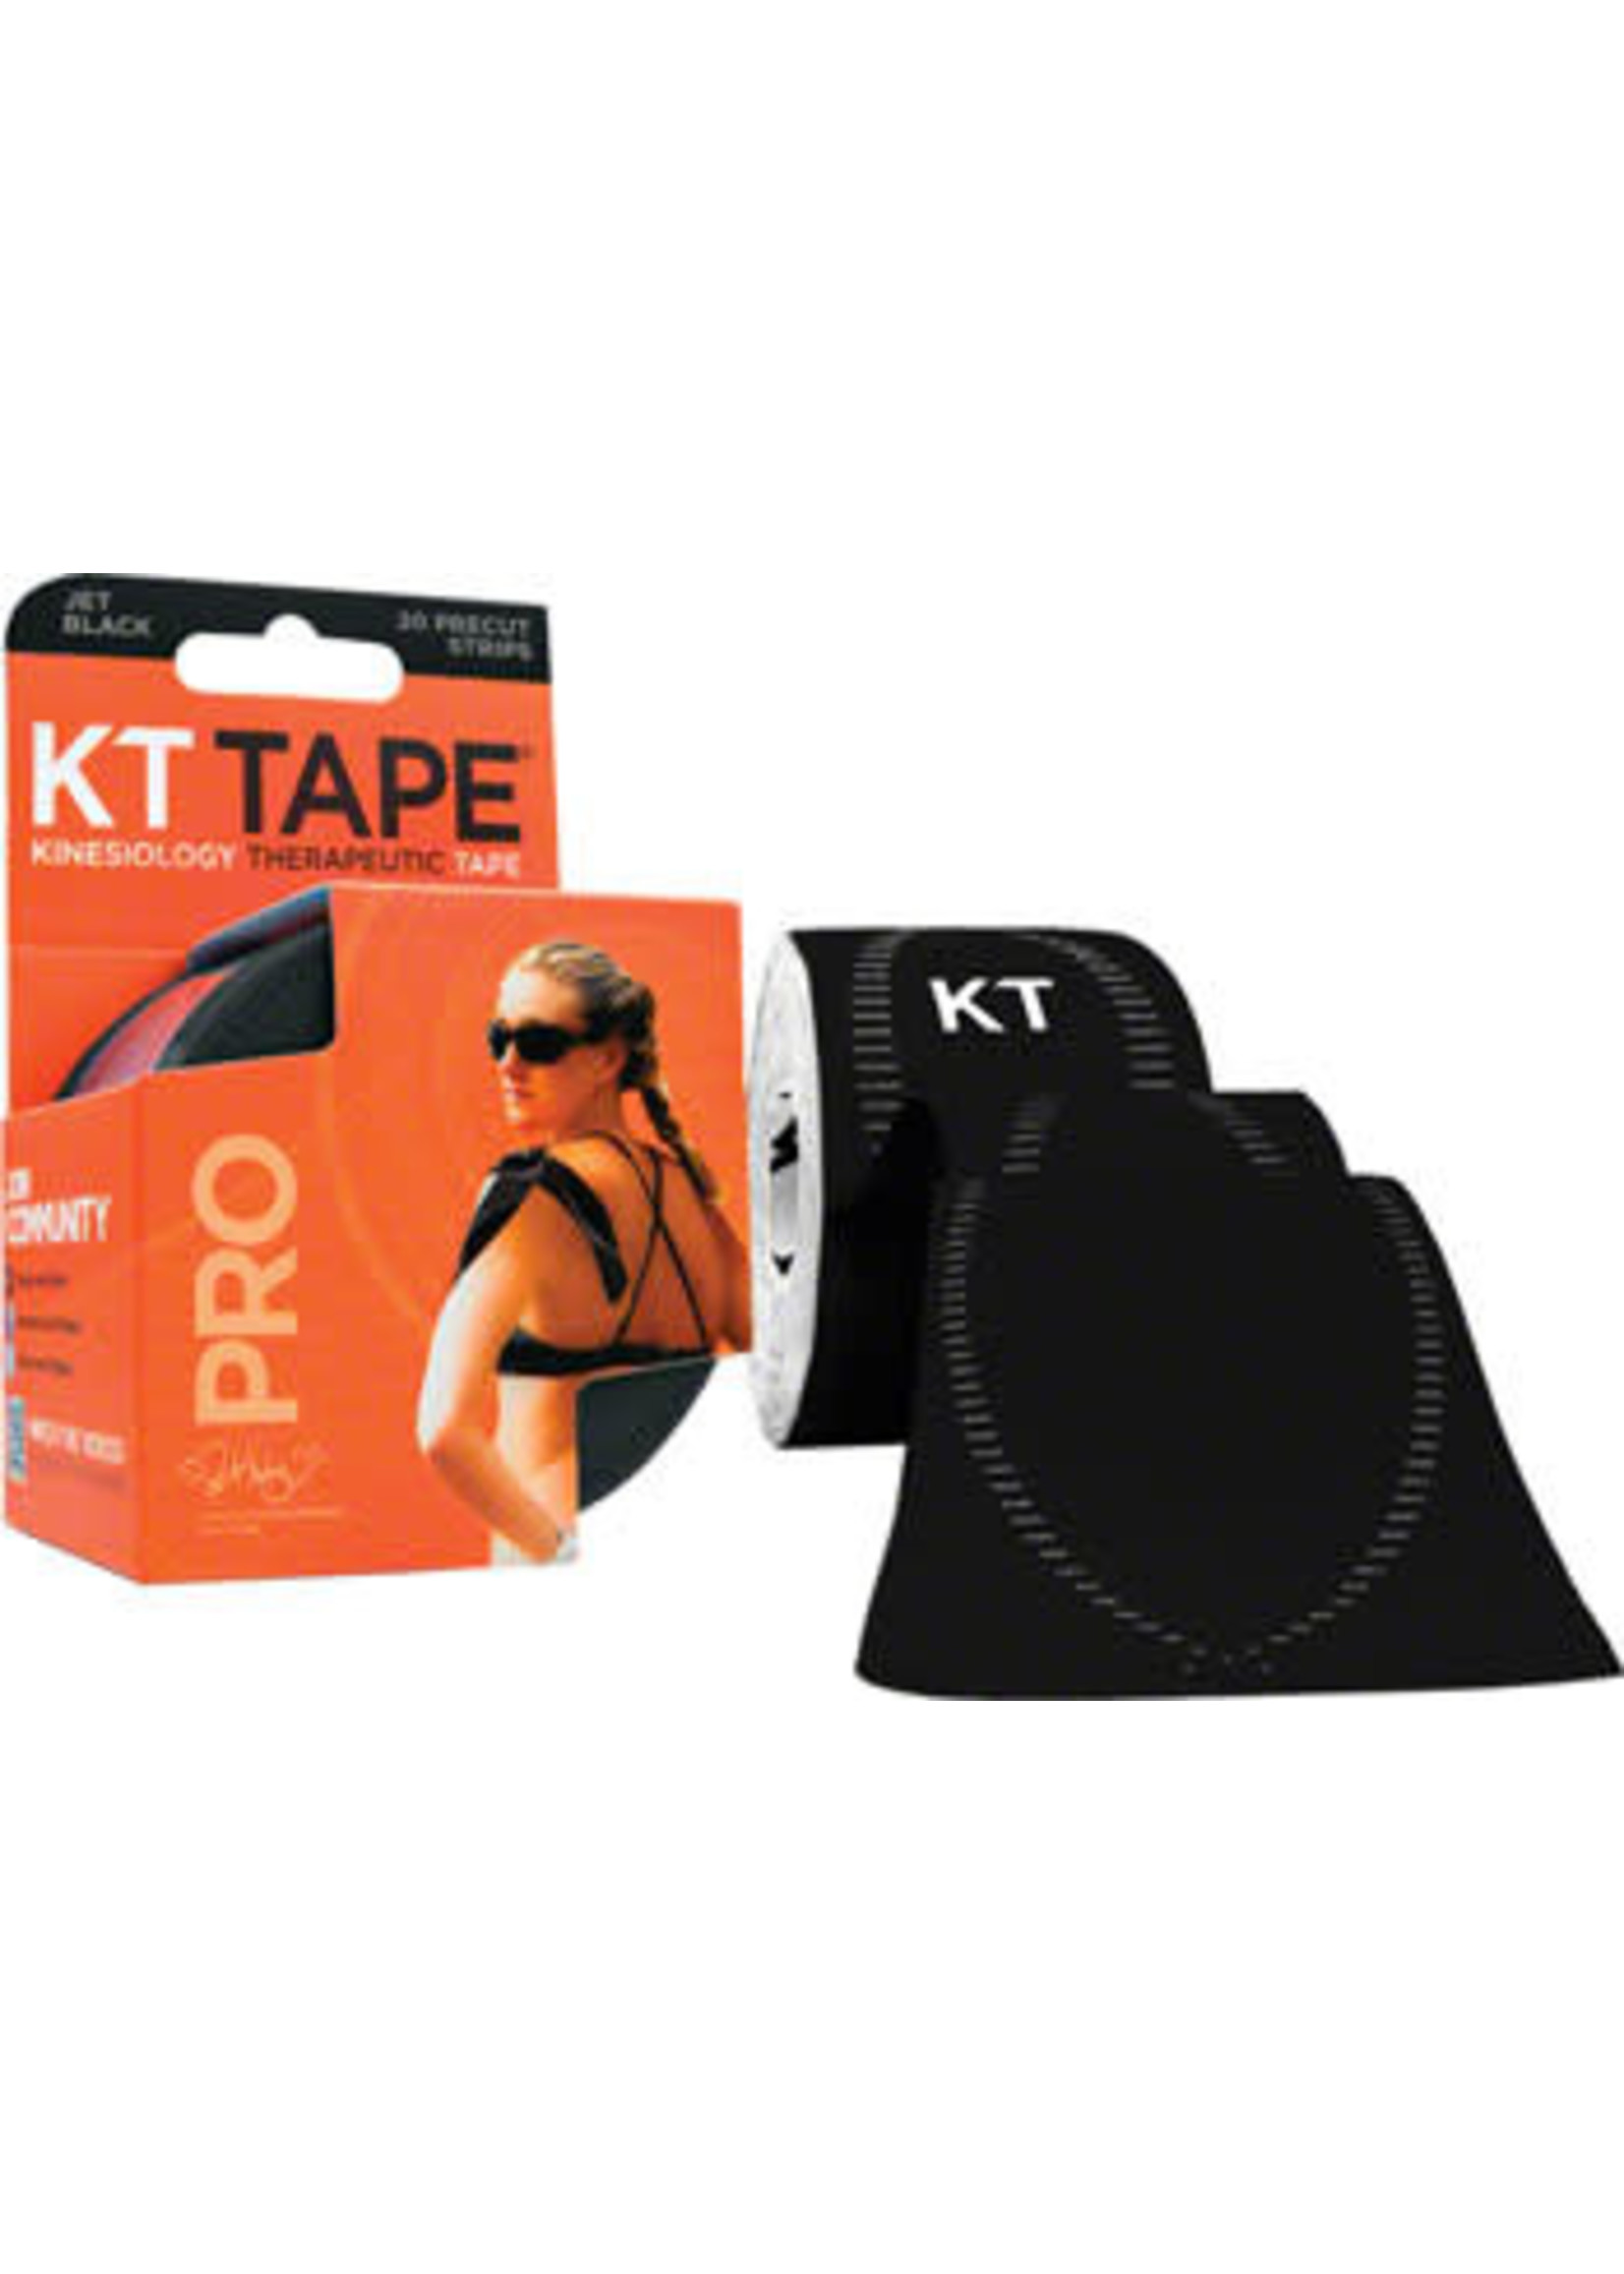 KT Tape KT Tape Pro Kinesiology Therapeutic Body Tape: Roll of 20 Strips Jet Black